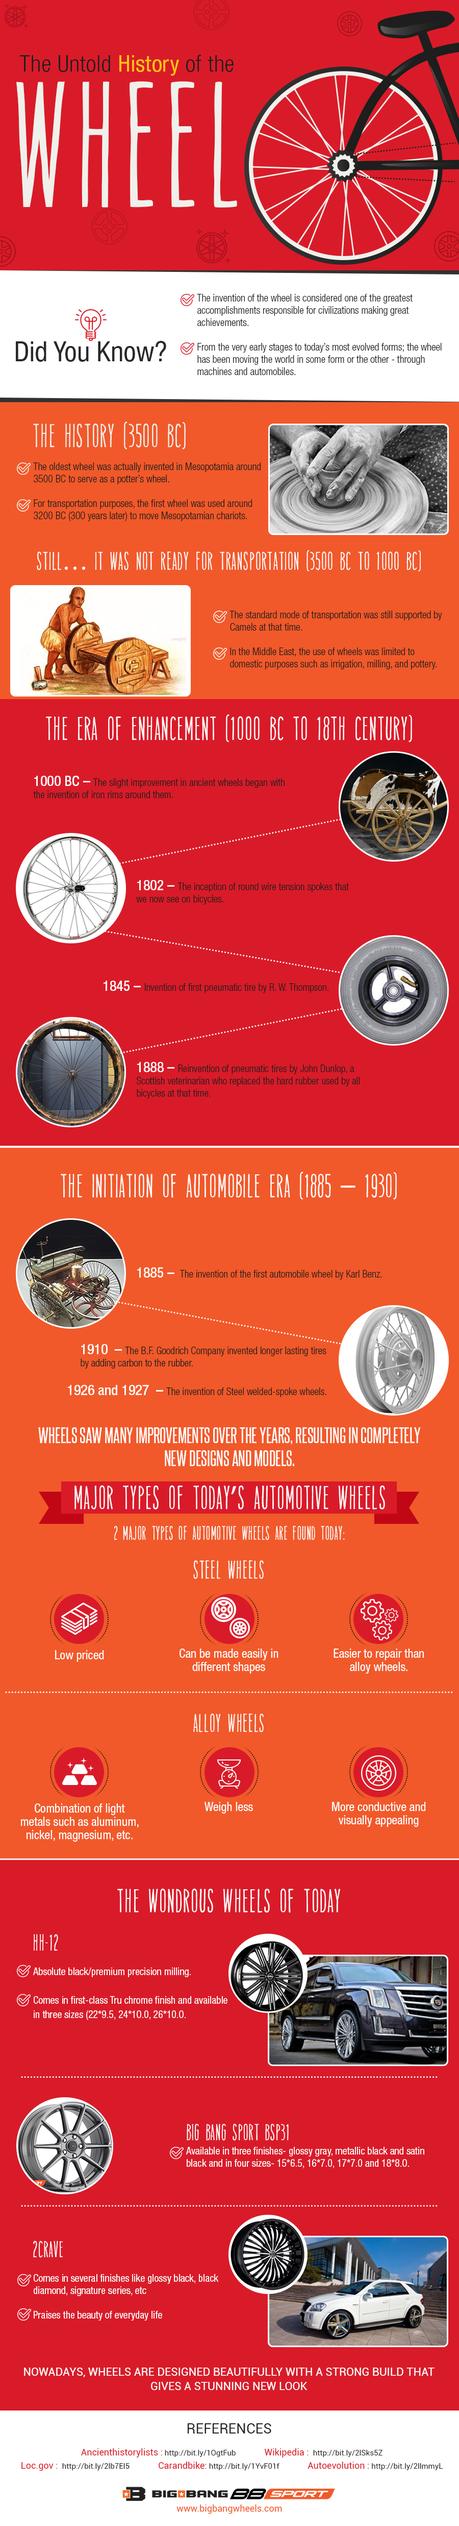 history of the wheel infographic